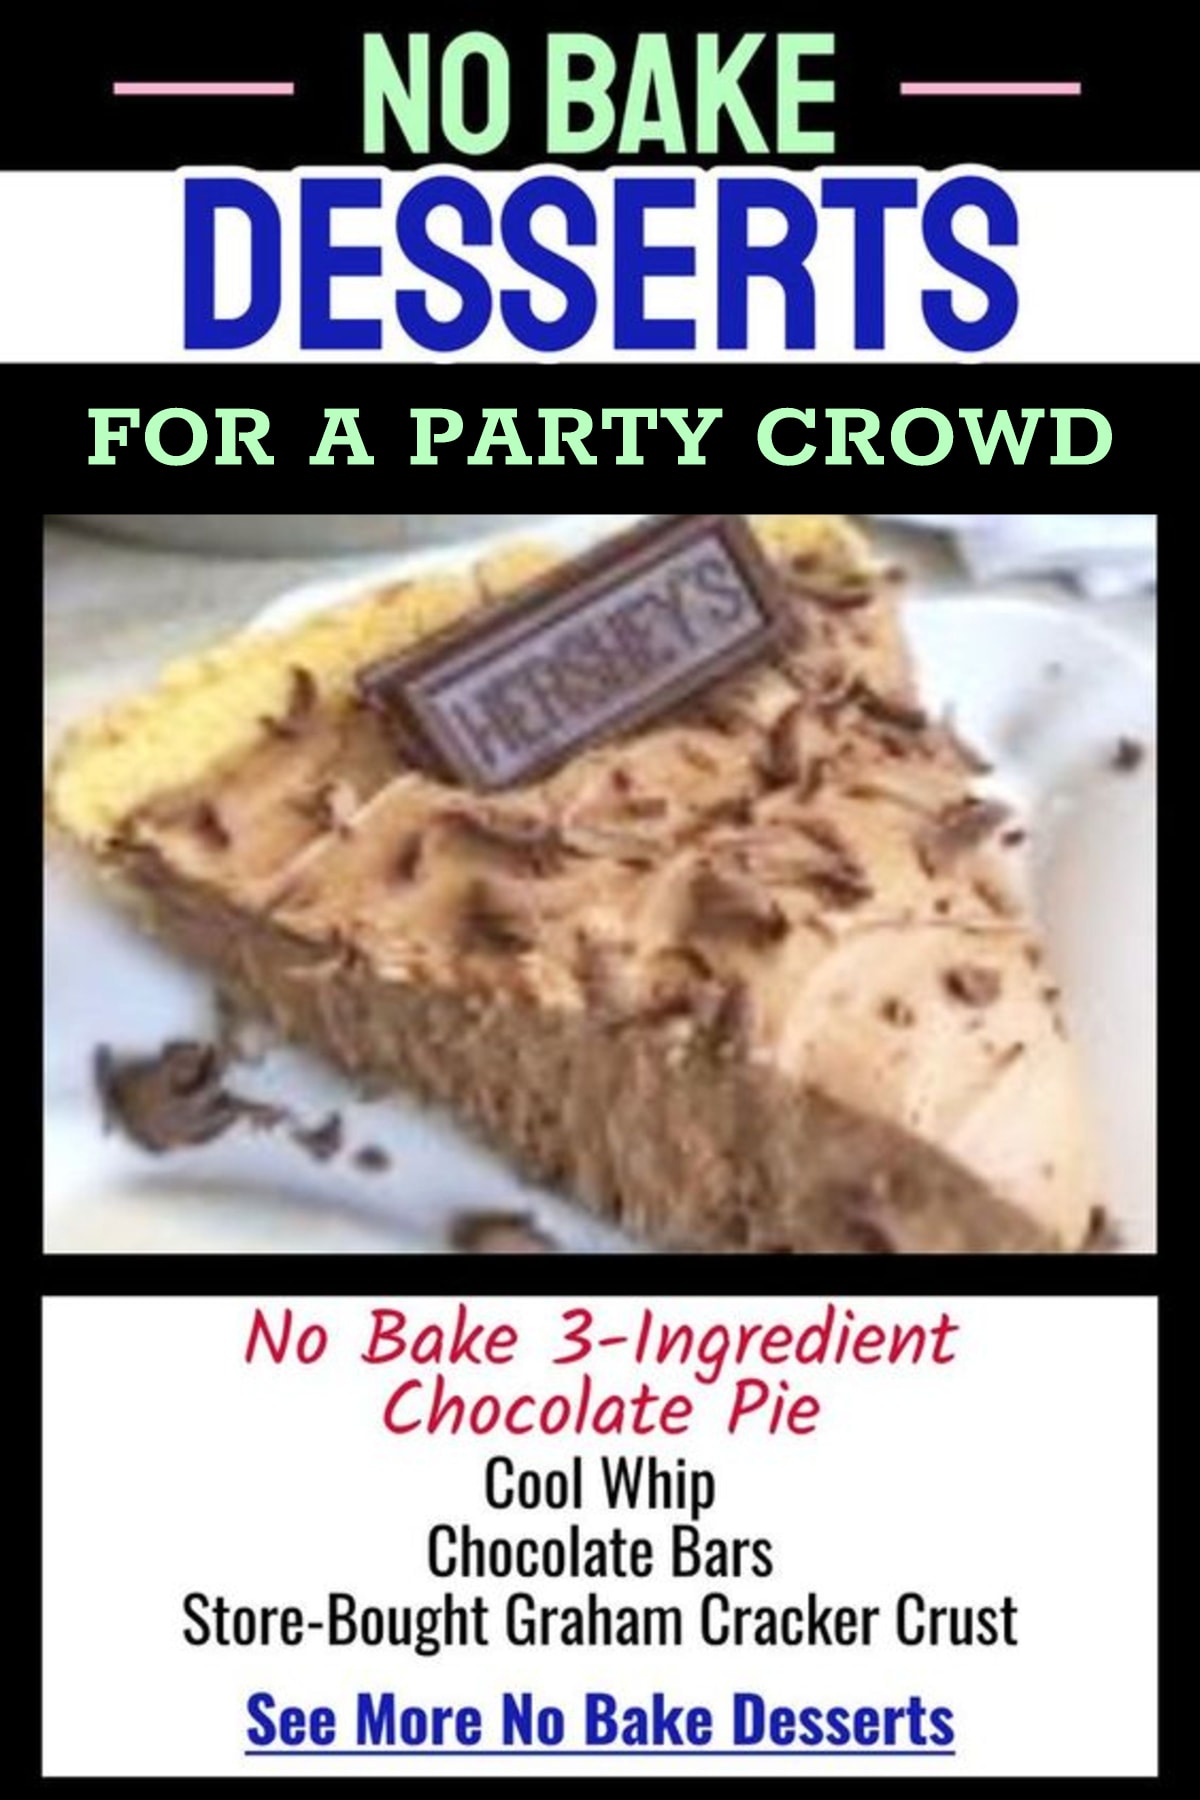 large batch no bake party desserts perfect for a potluck at work, church, block party or family reunion